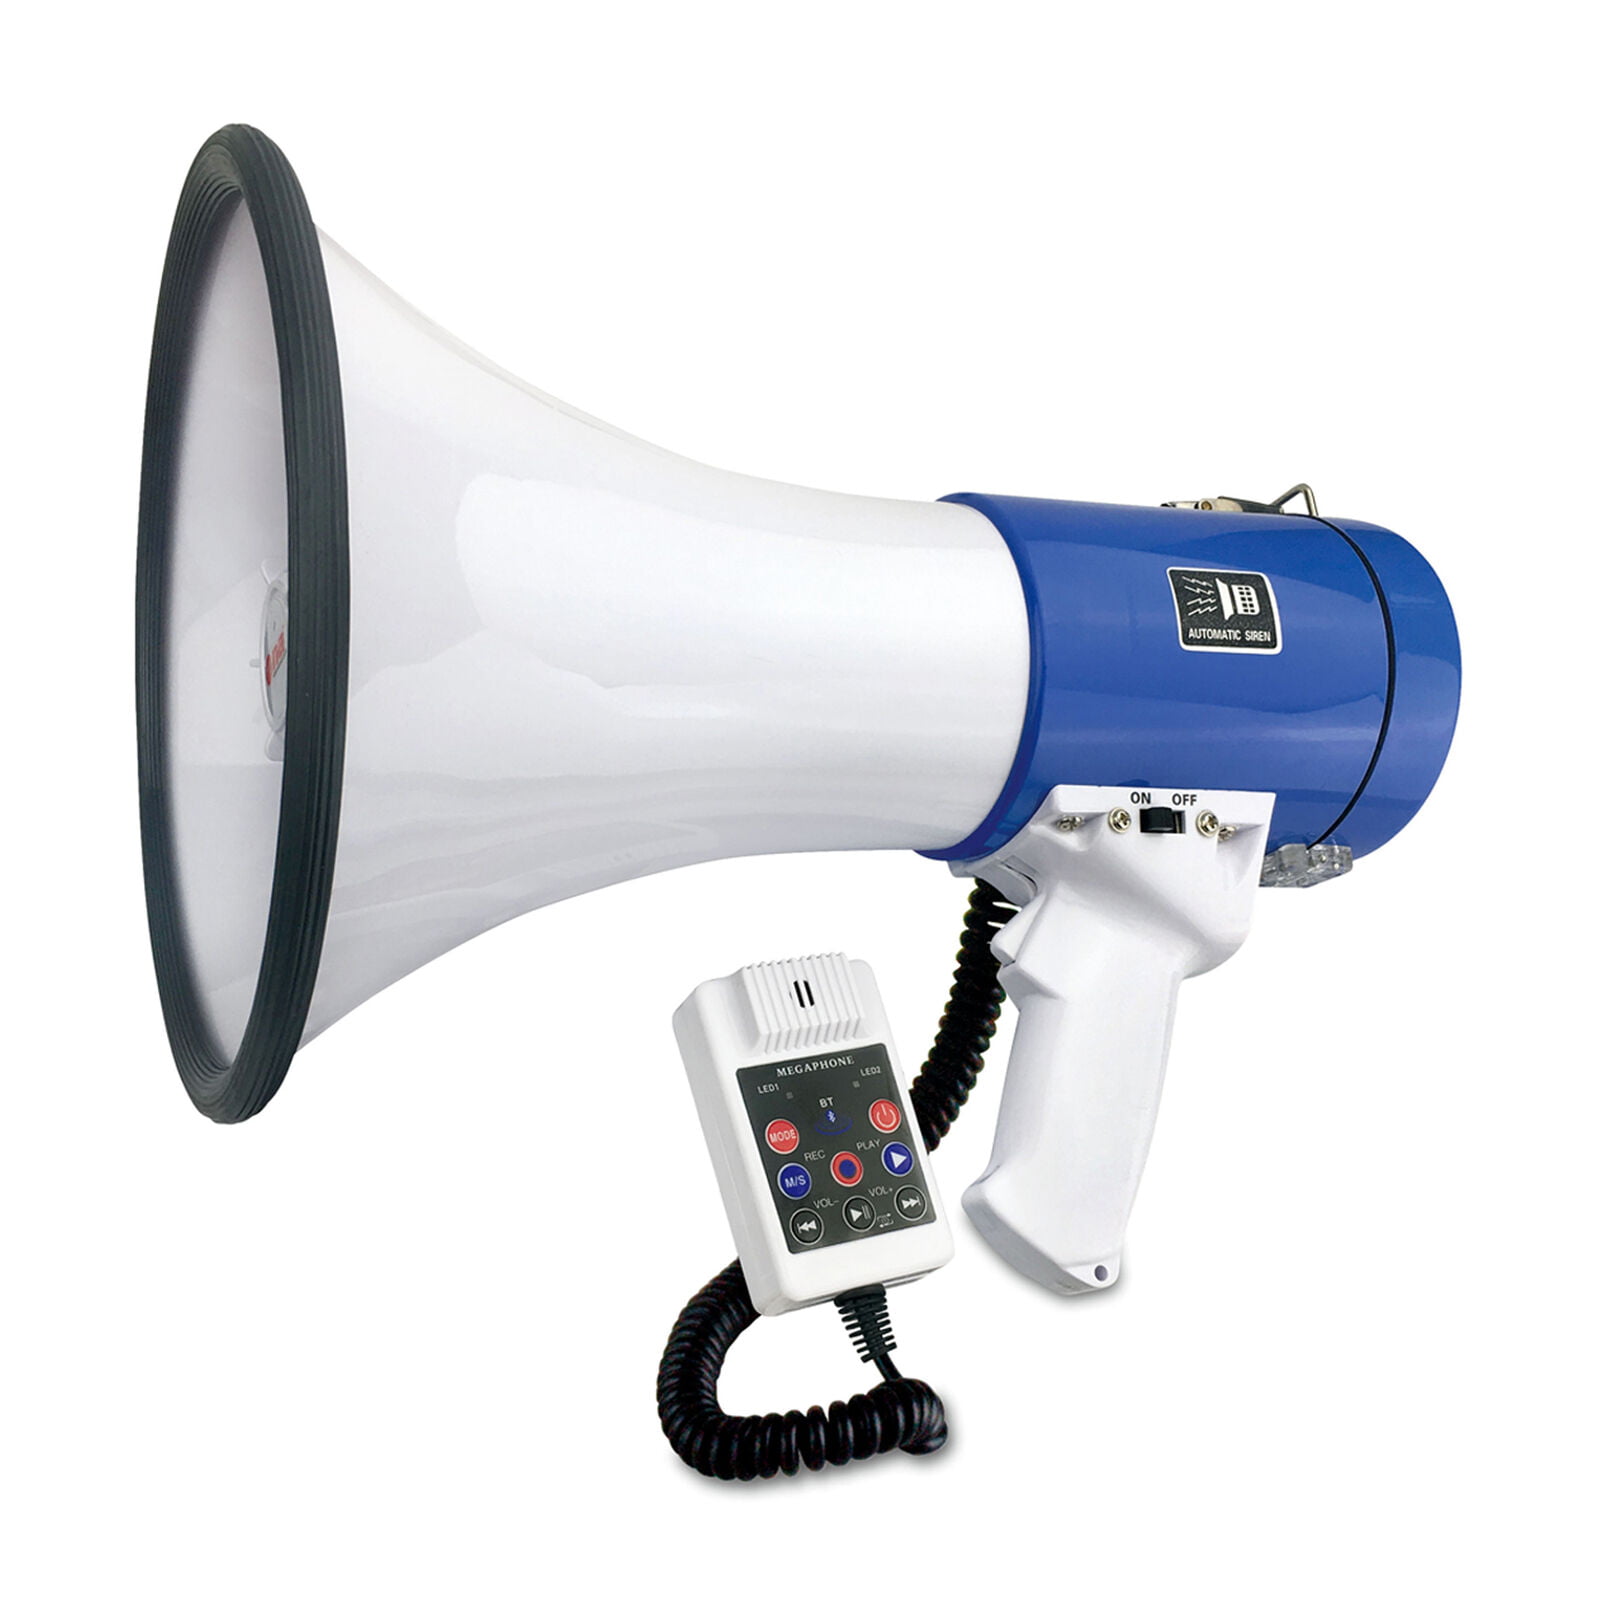 PyleHome 50 Watt Professional Rechargeable Megaphone Piezo Dynamic Lithium Battery Record Siren Talk Modes And Aux-Input For All iPod MP3 Players